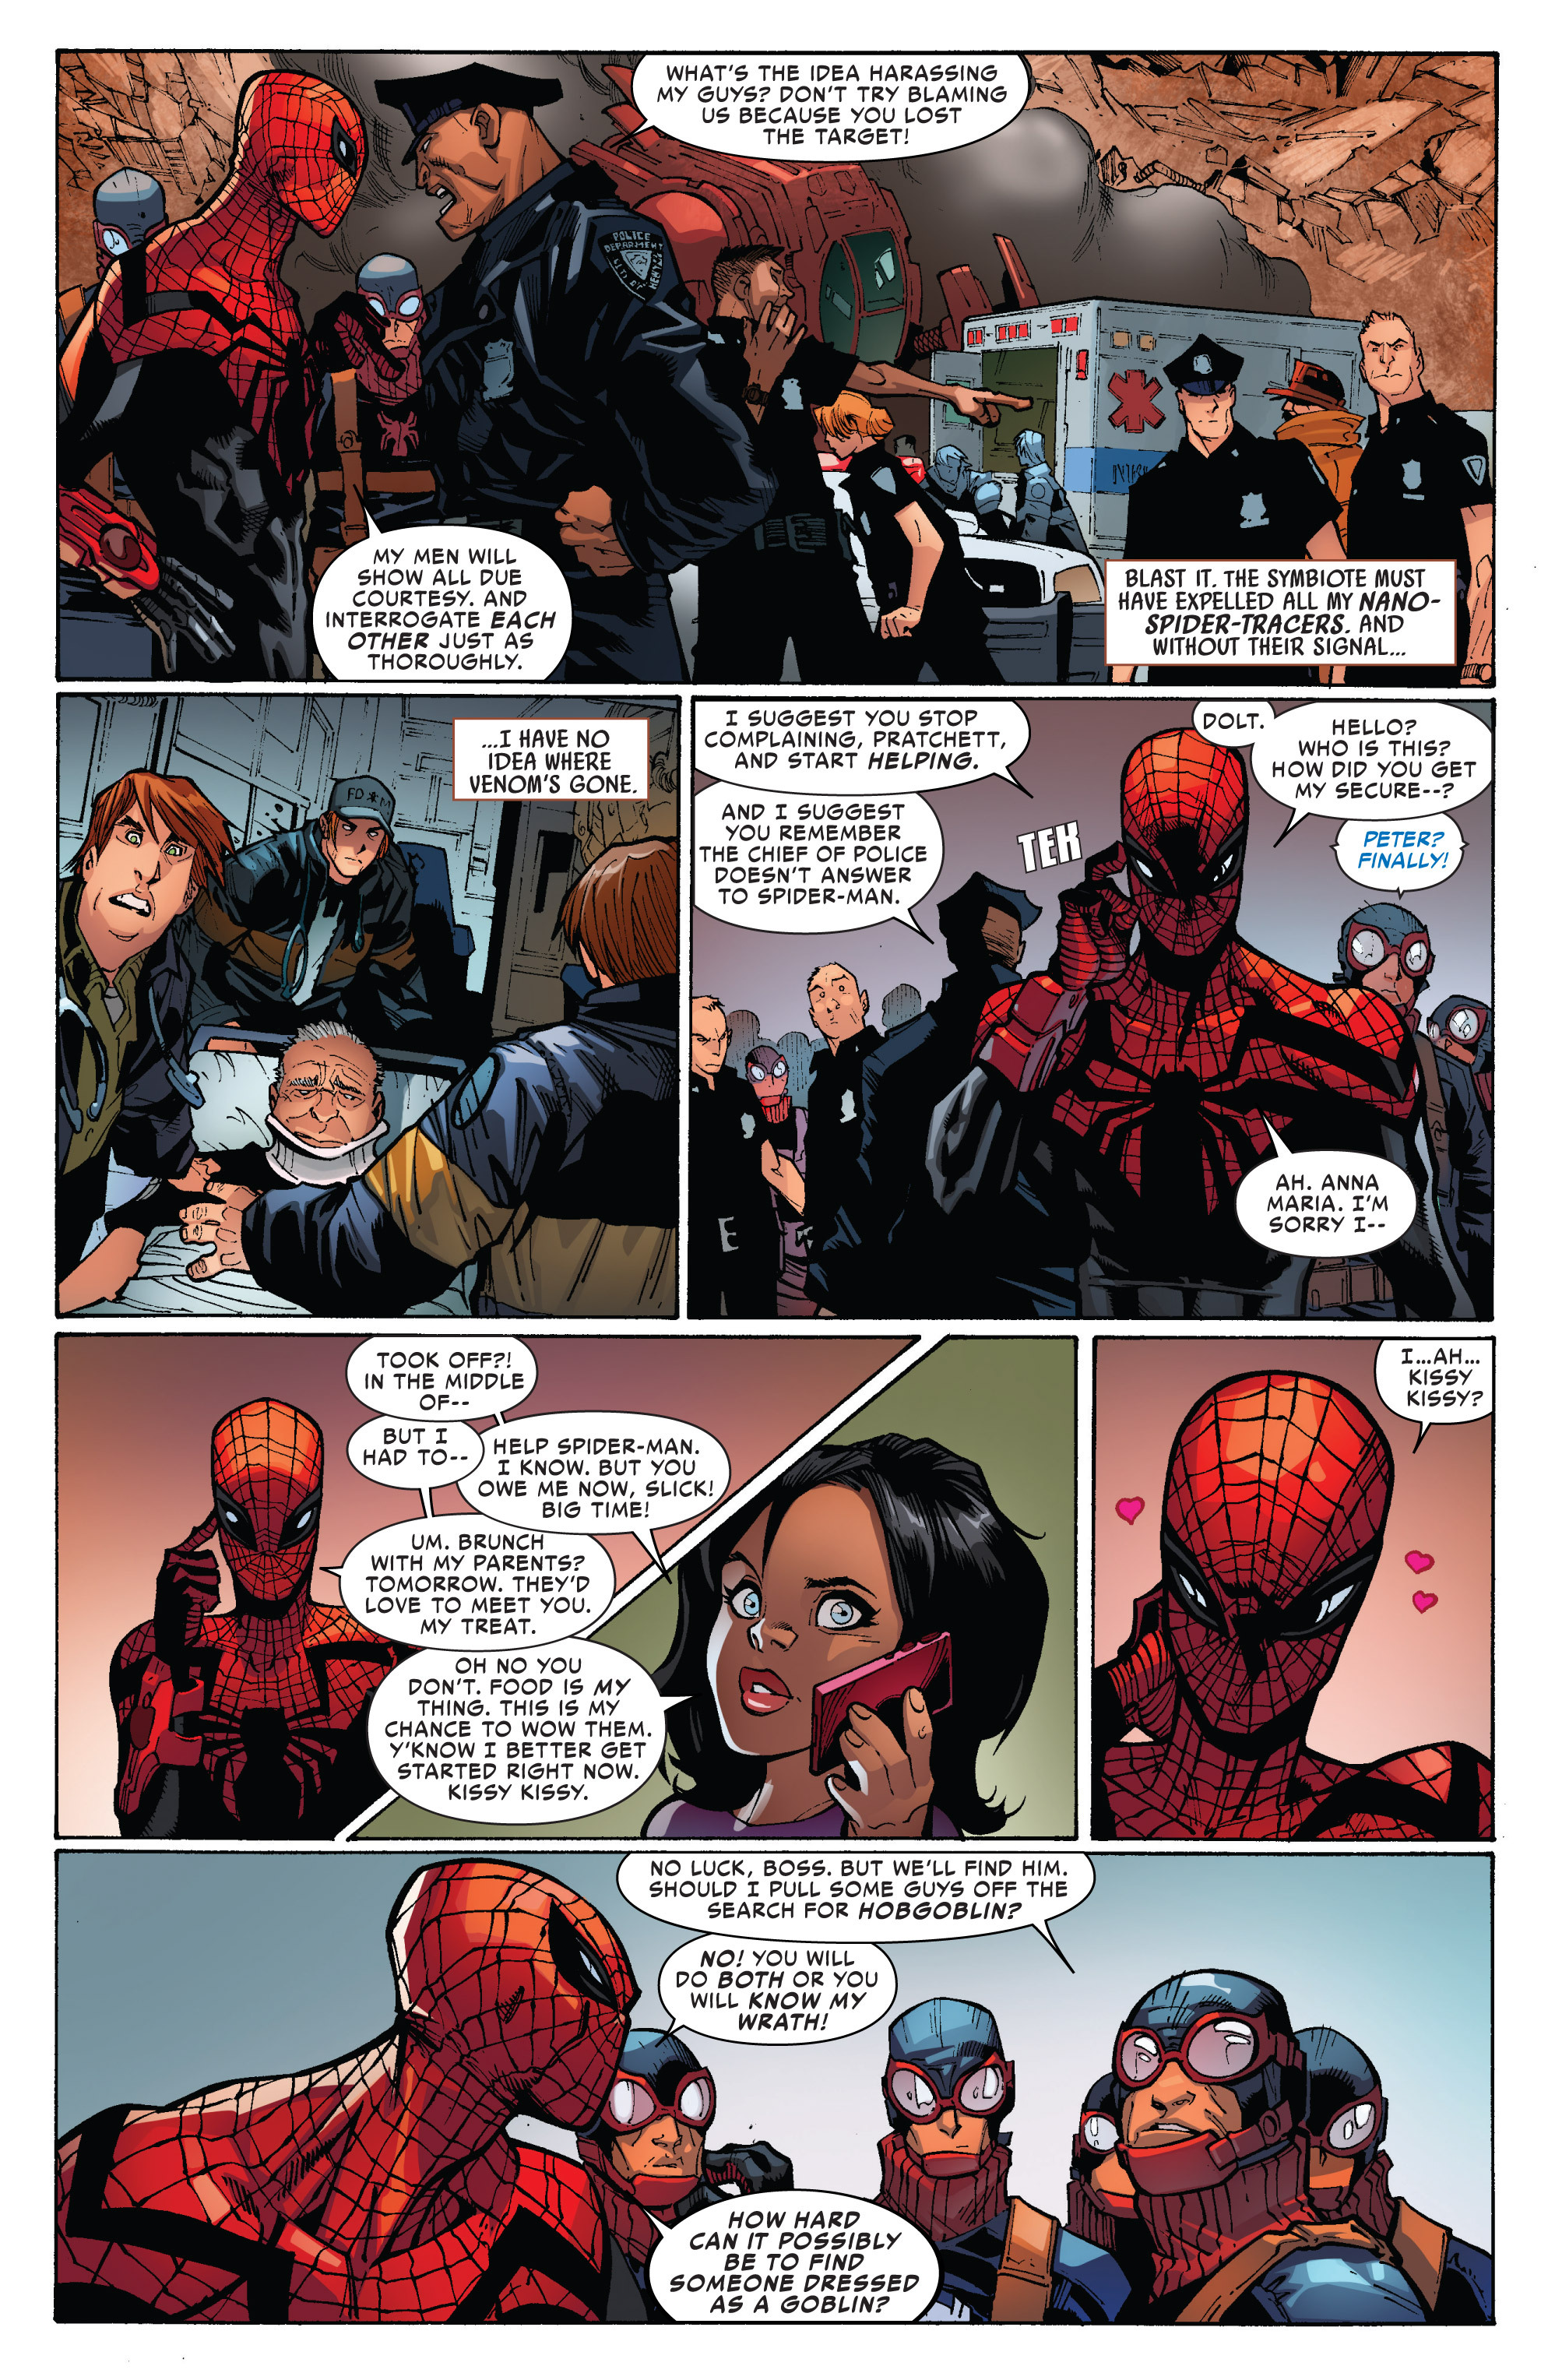 Superior Spider Man Issue 23 | Read Superior Spider Man Issue 23 comic  online in high quality. Read Full Comic online for free - Read comics  online in high quality .|